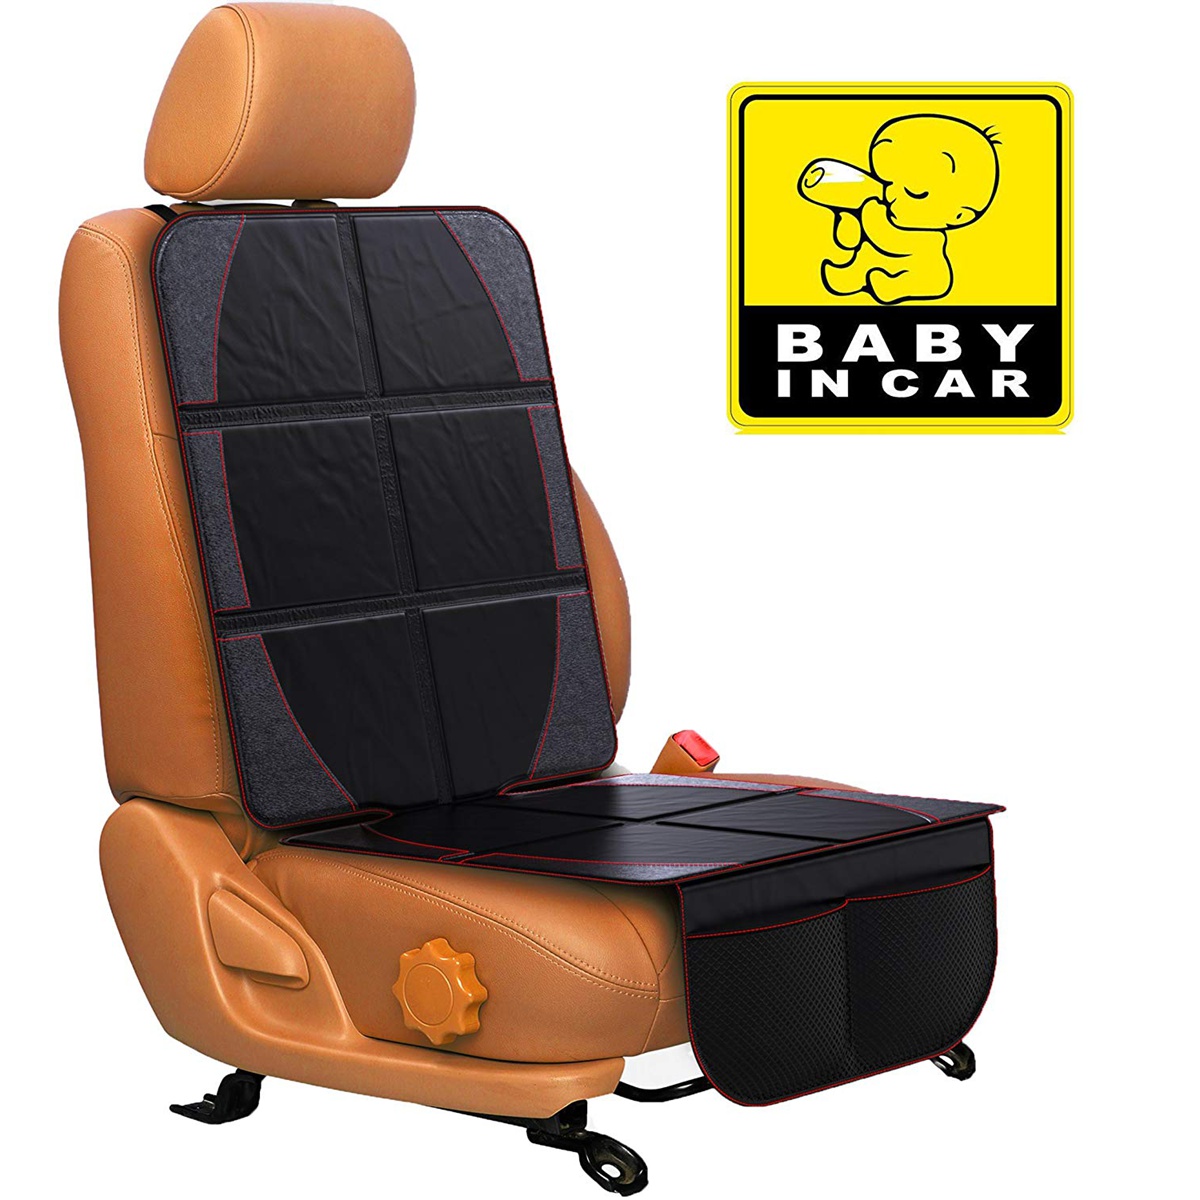 Car Seat Protector Thickest Padding Durable Waterproof Fabric